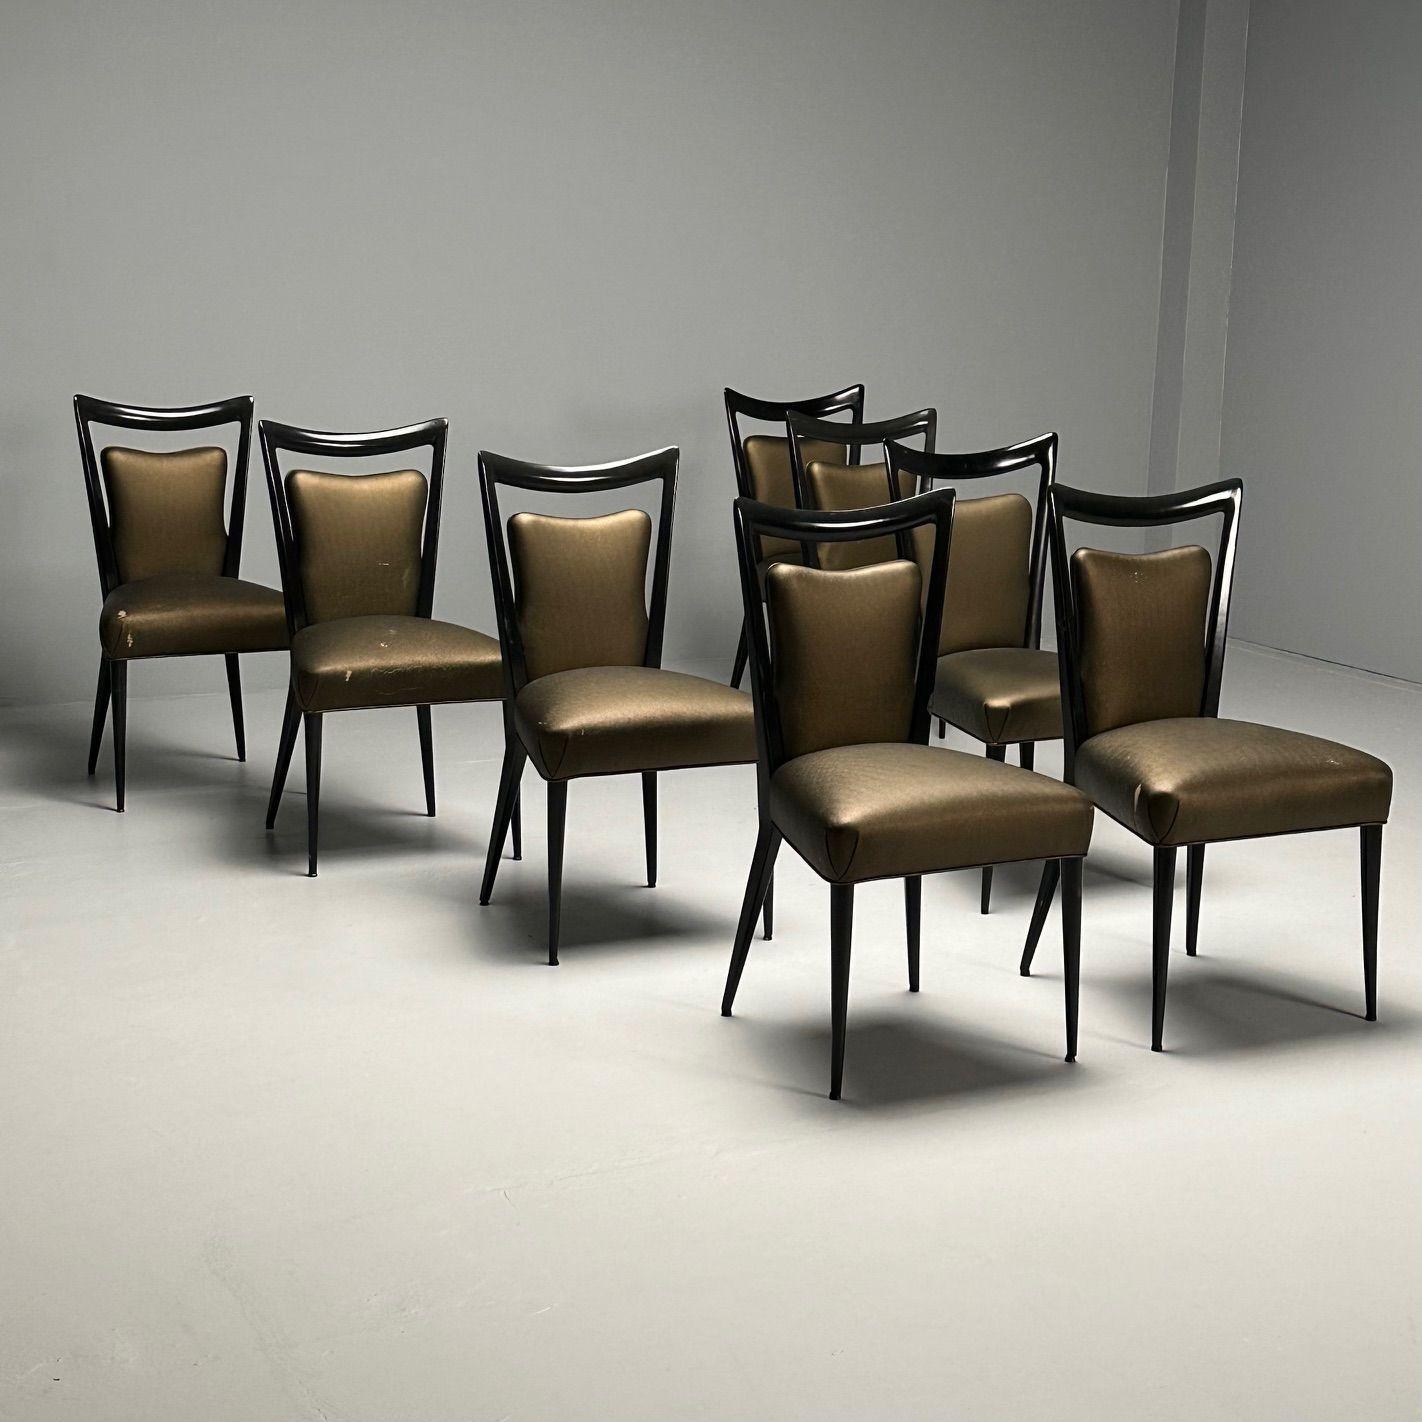 Mid-20th Century Melchiorre Bega, Italian Mid-Century Modern, Eight Dining Chairs, Black Lacquer For Sale